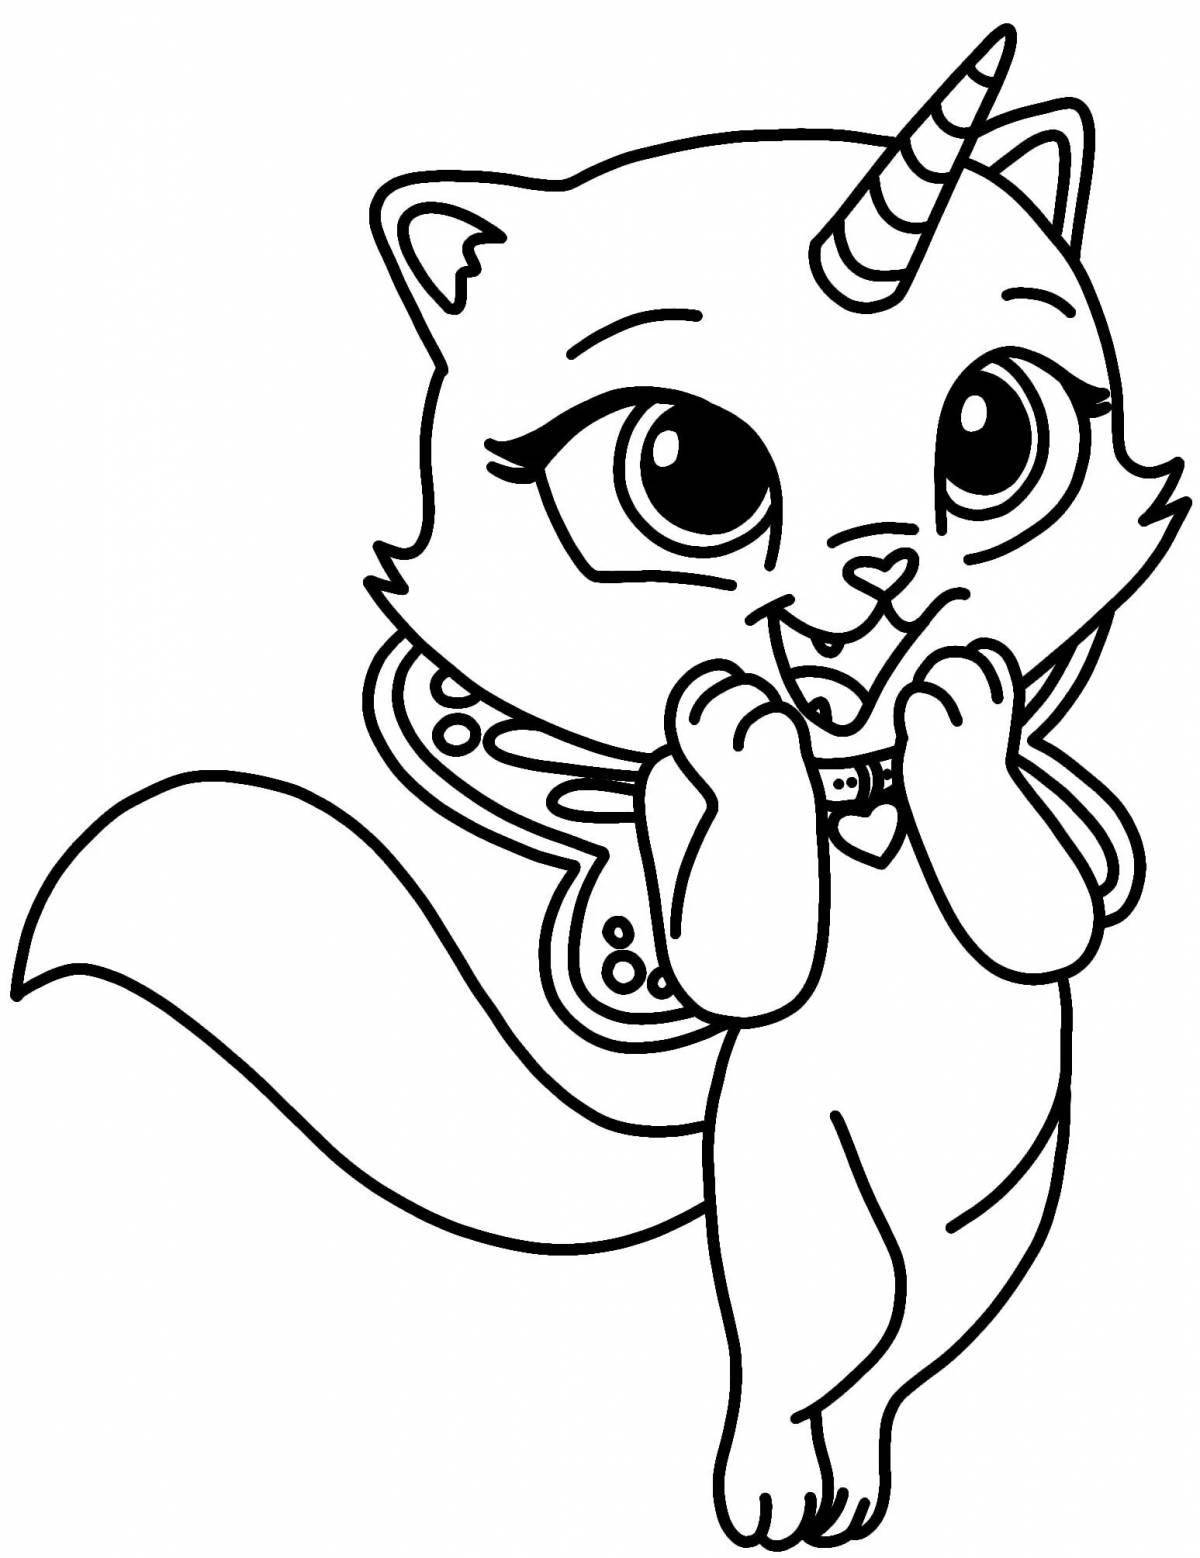 Inspirational unicorn cat coloring book for girls